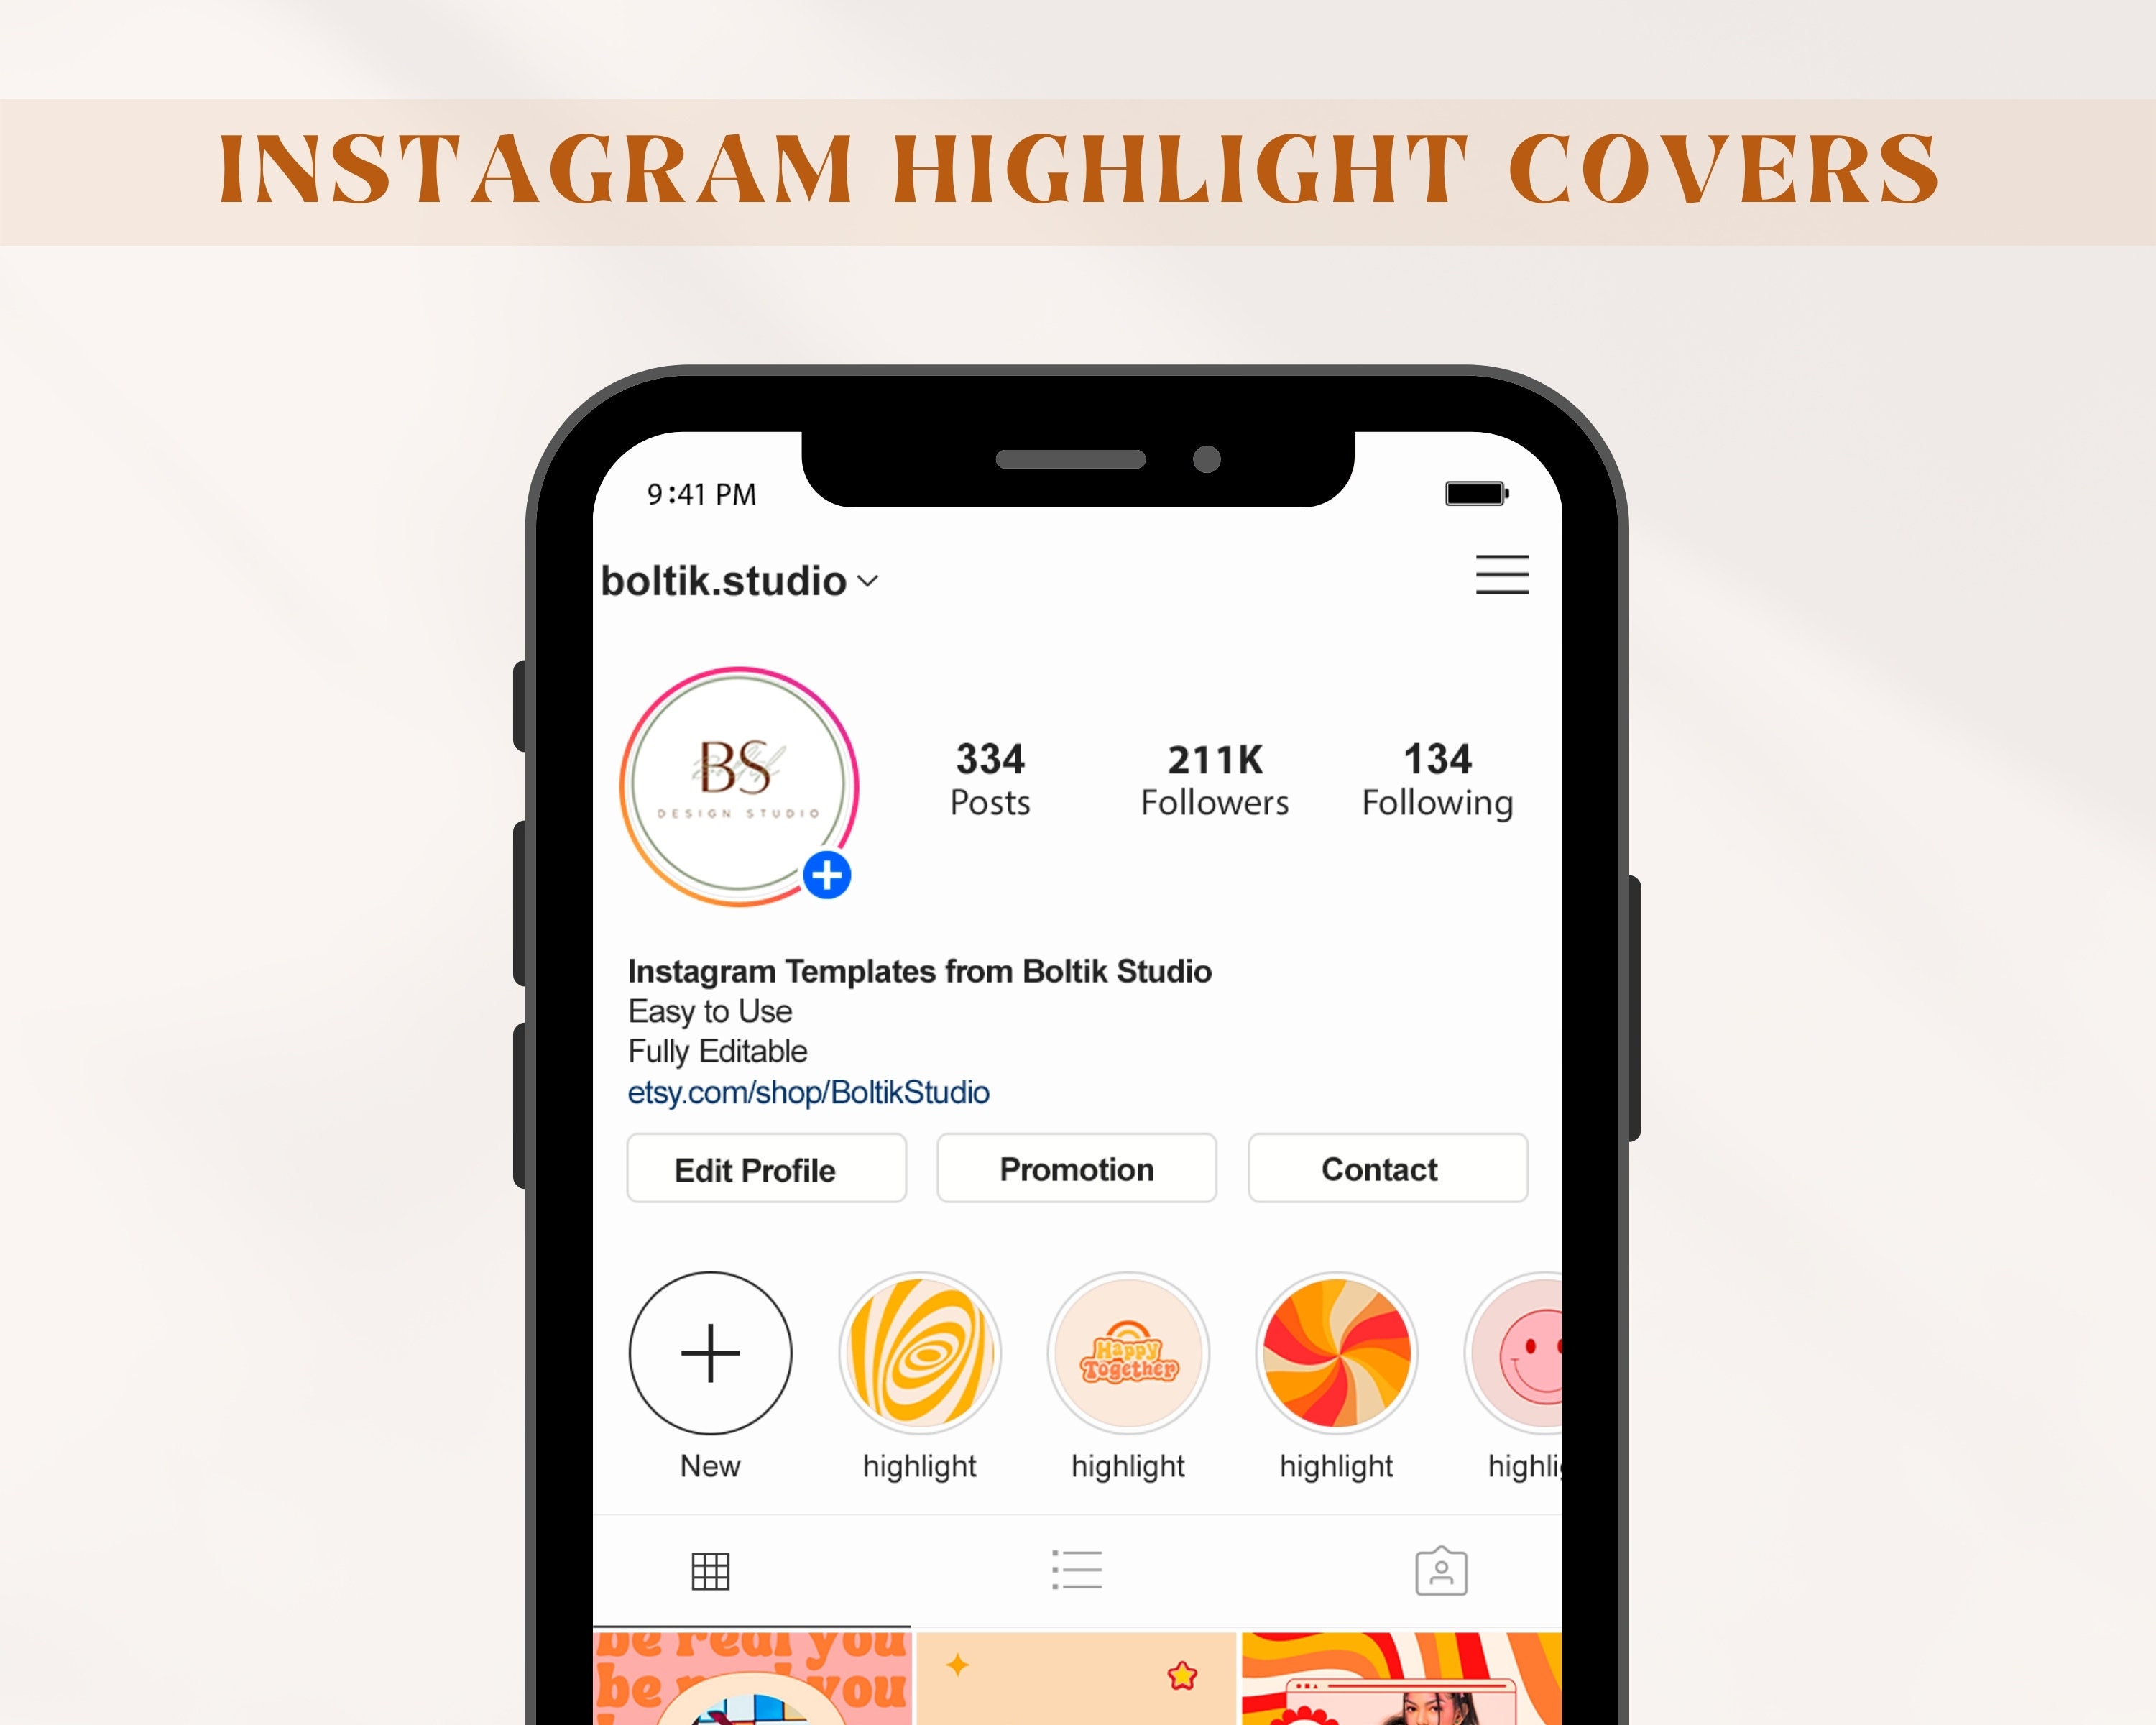 Retro Instagram Highlight Covers Groovy Covers for Instagram - Etsy